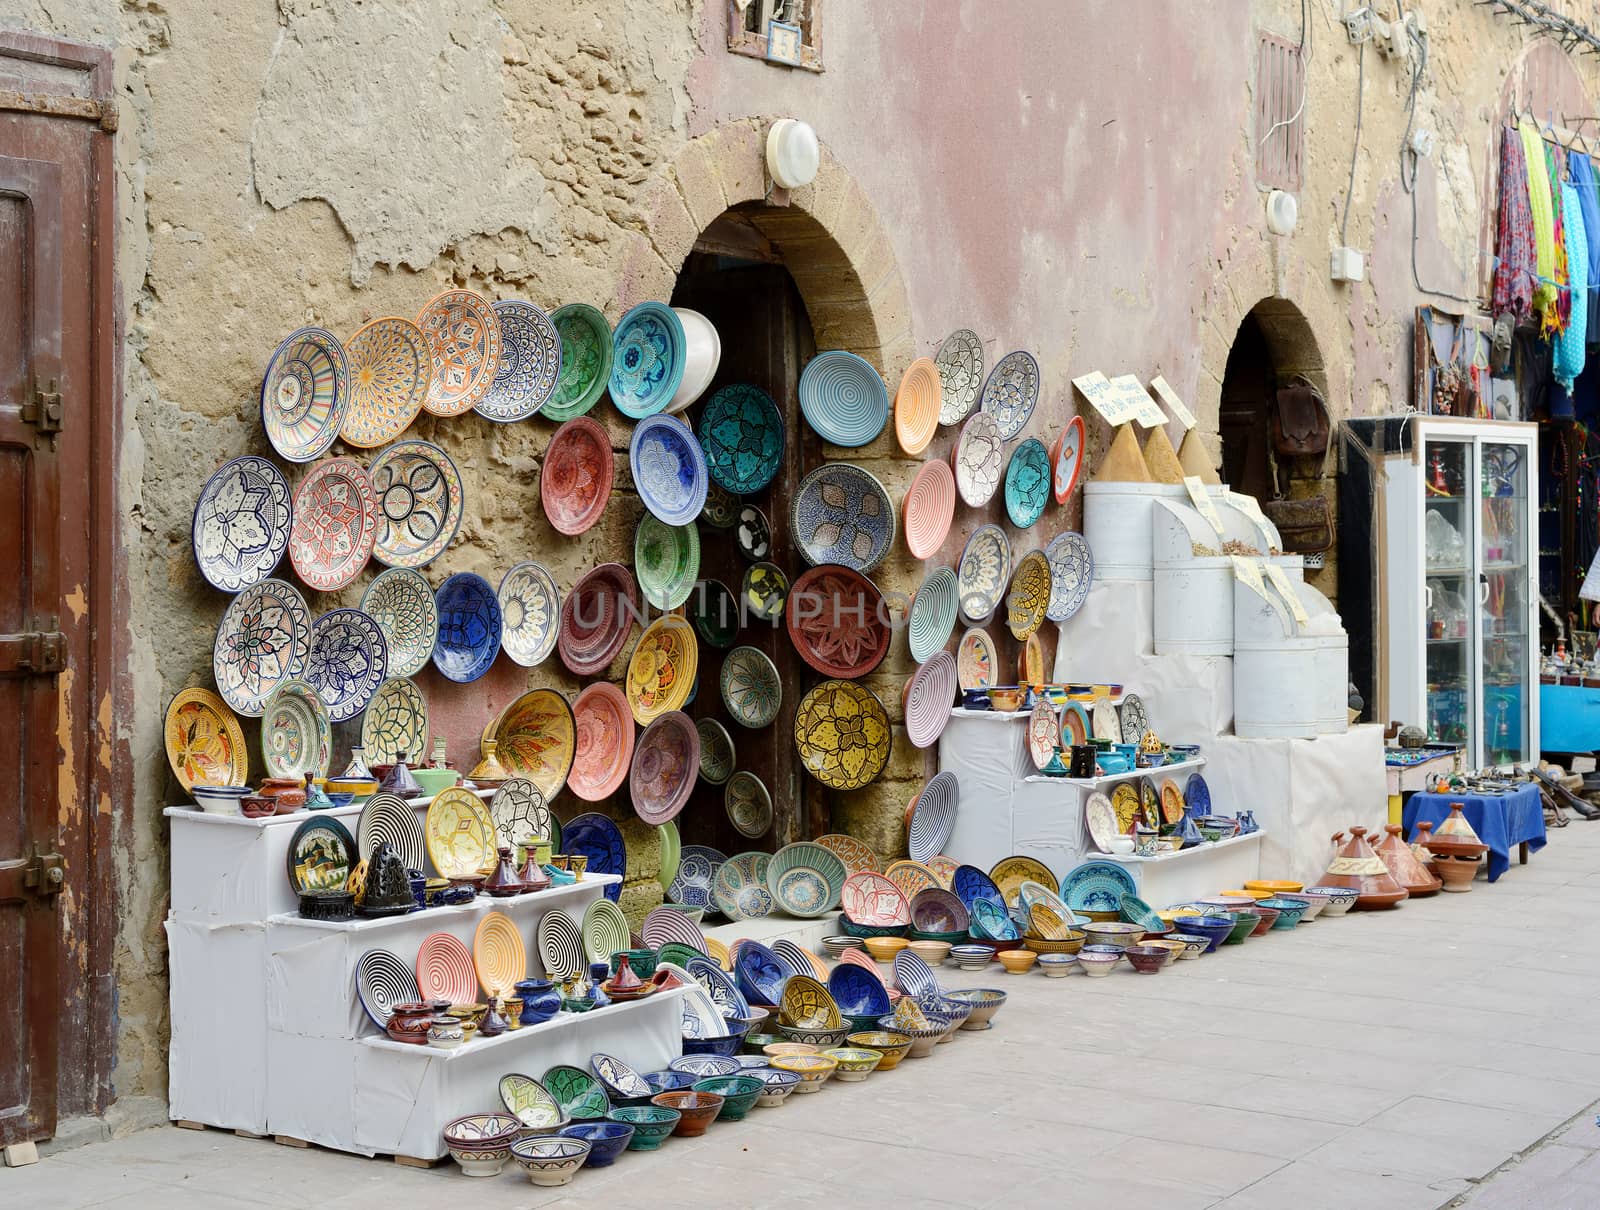 Morocco shop front showing handmade crafts and pottery